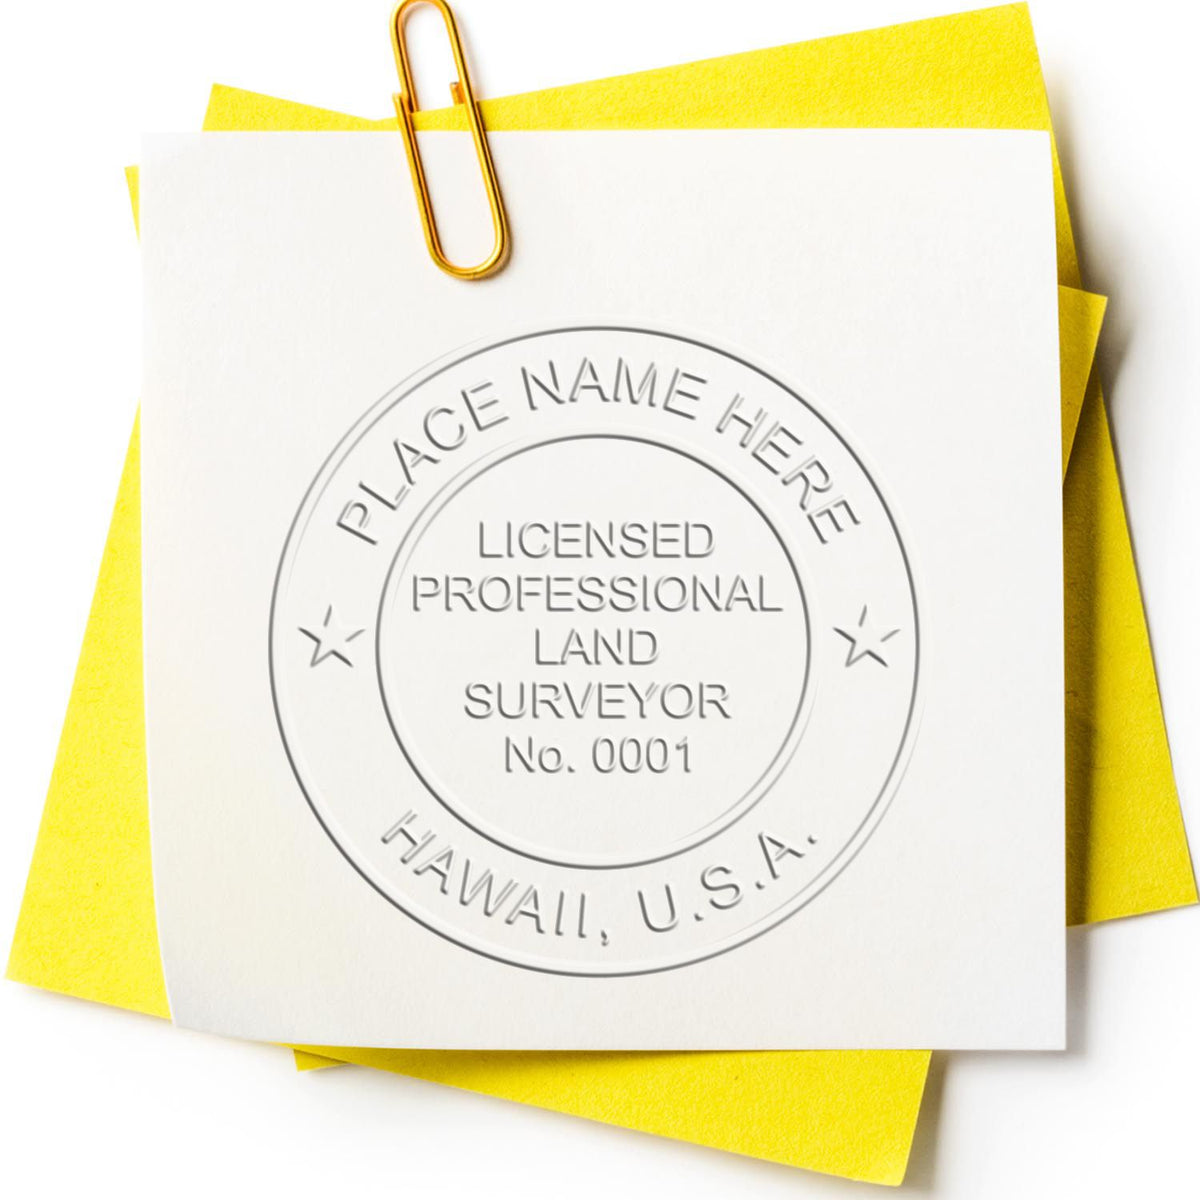 The Gift Hawaii Land Surveyor Seal stamp impression comes to life with a crisp, detailed image stamped on paper - showcasing true professional quality.